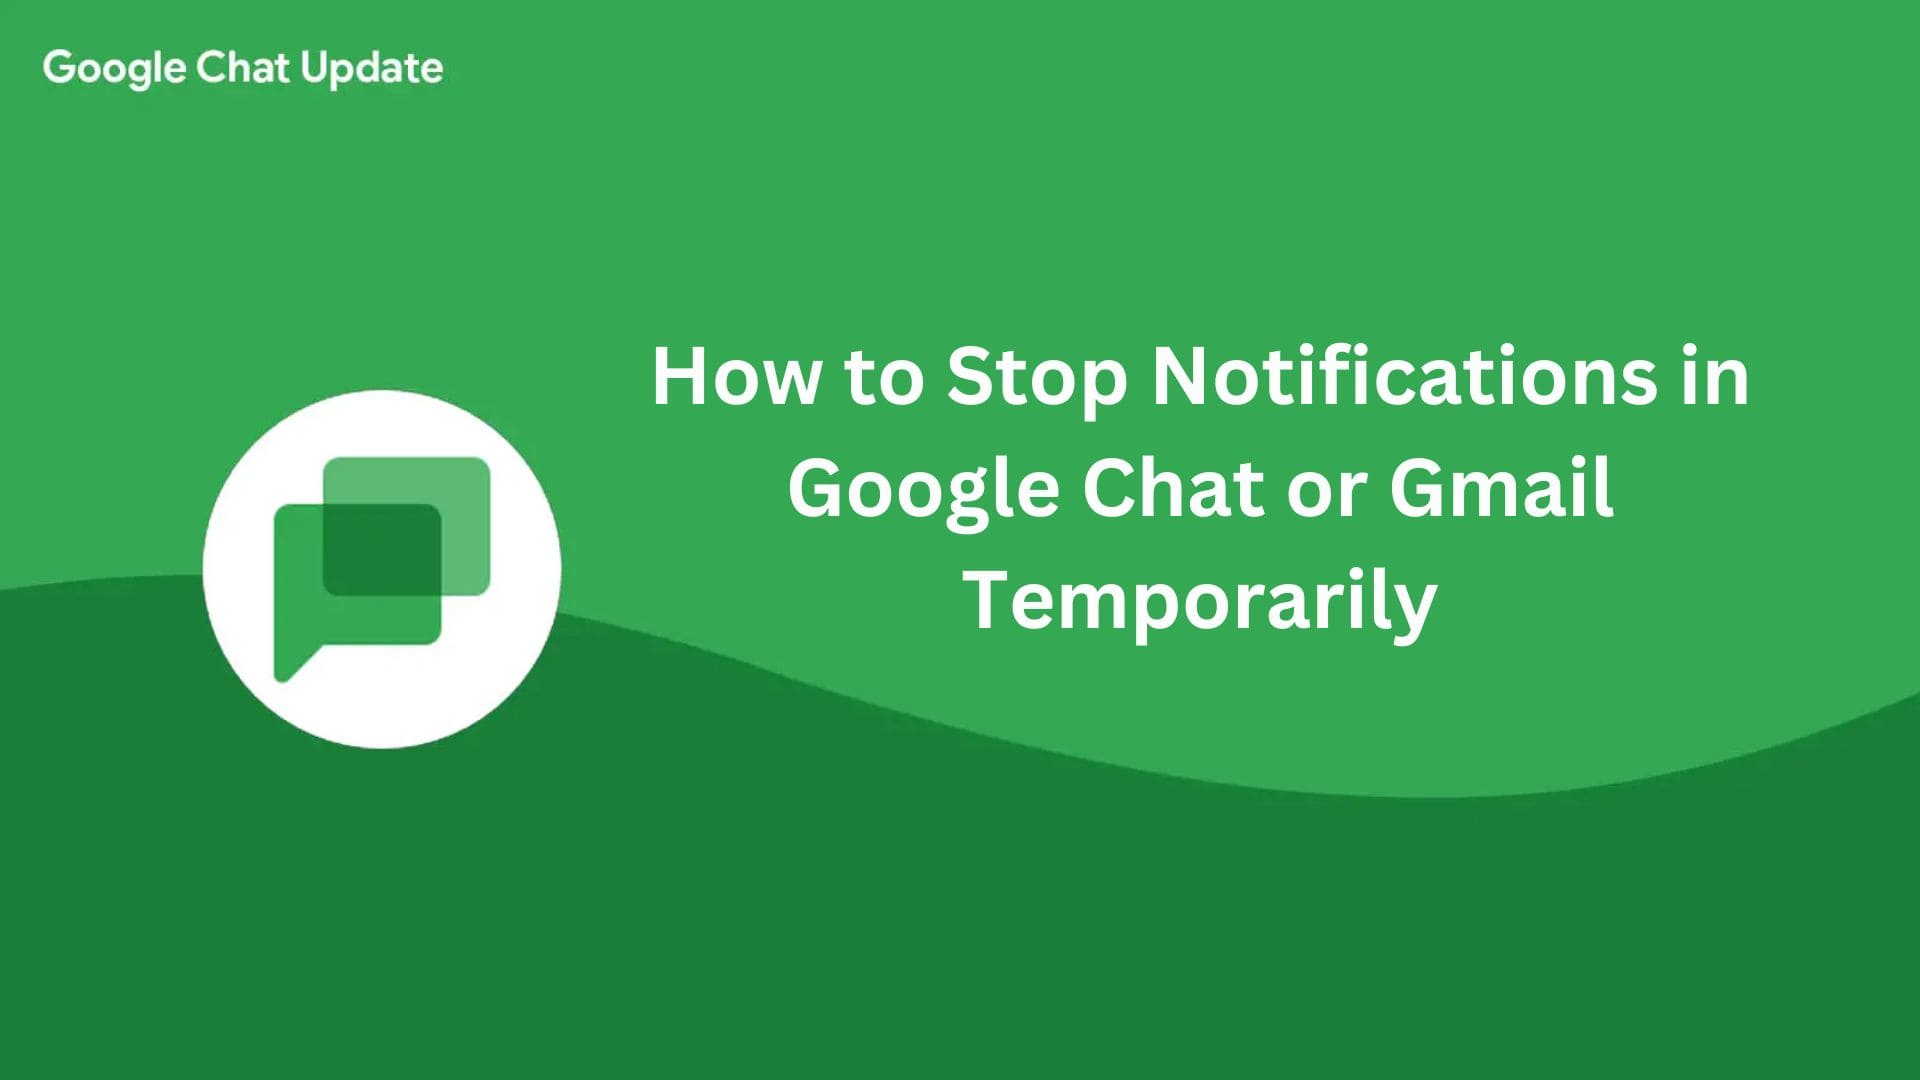 How to Stop Notifications in Google Chat or Gmail Temporarily